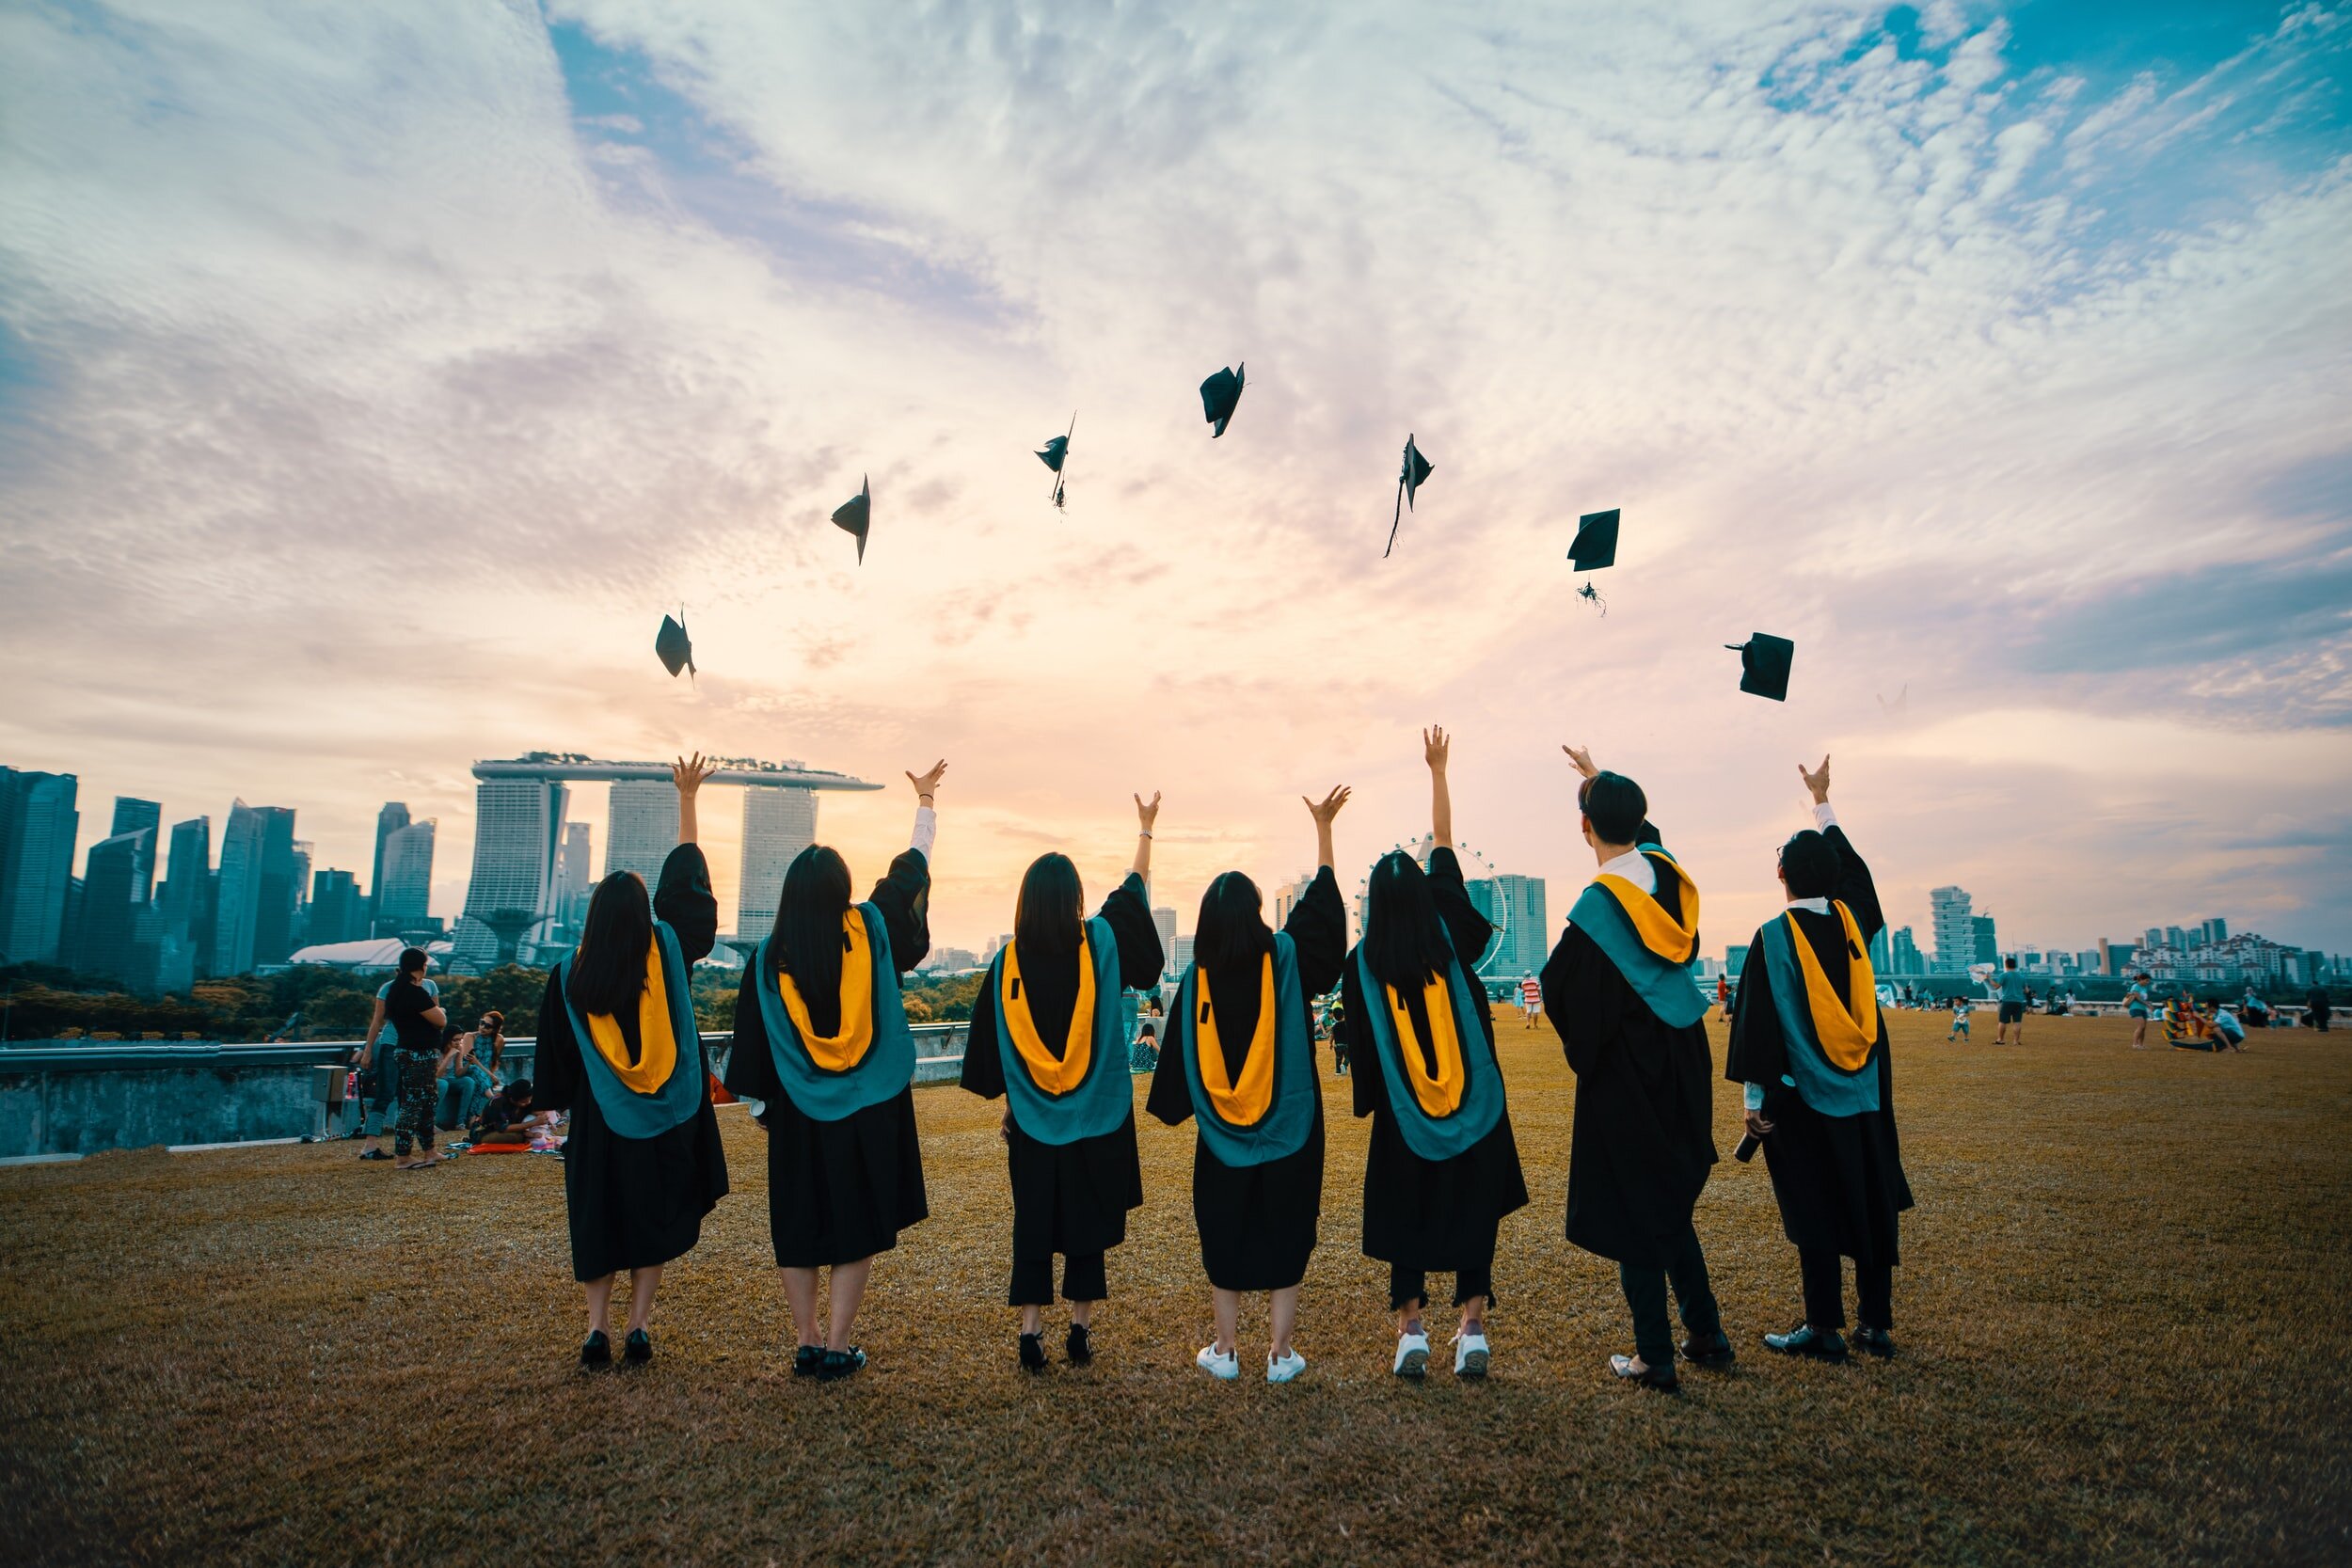 Photo by Pang Yuhao on Unsplash A group of graduates wear black robes with blue and golden hoods. They throw their caps into a cloudy sky.